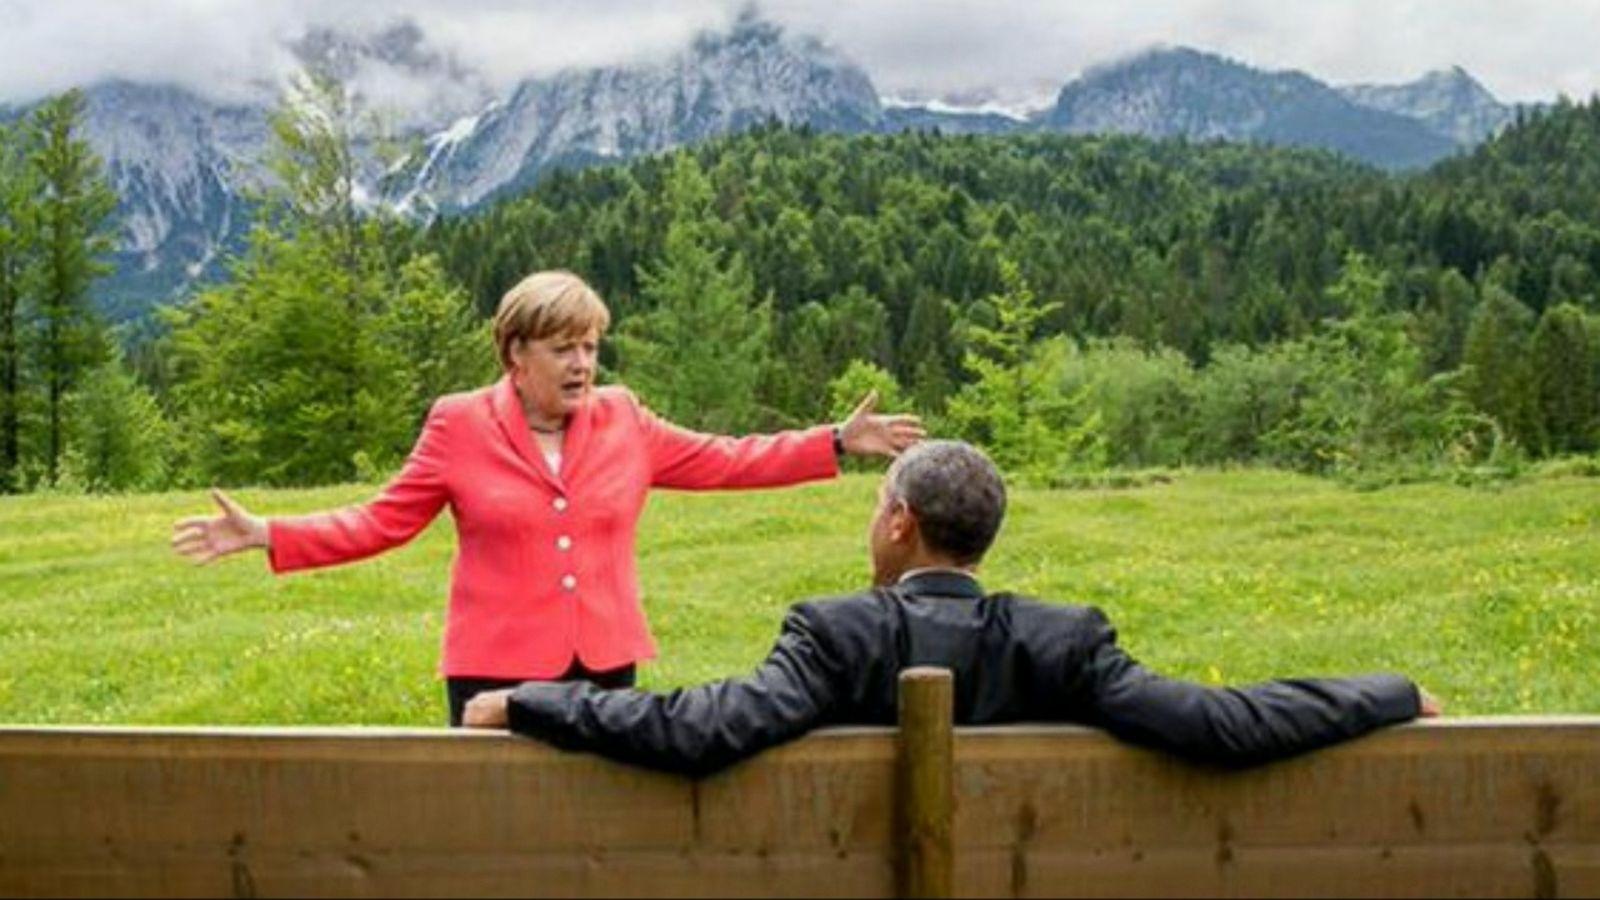 That Time Obama and Angela Merkel's Conversation Turned Into a Scene